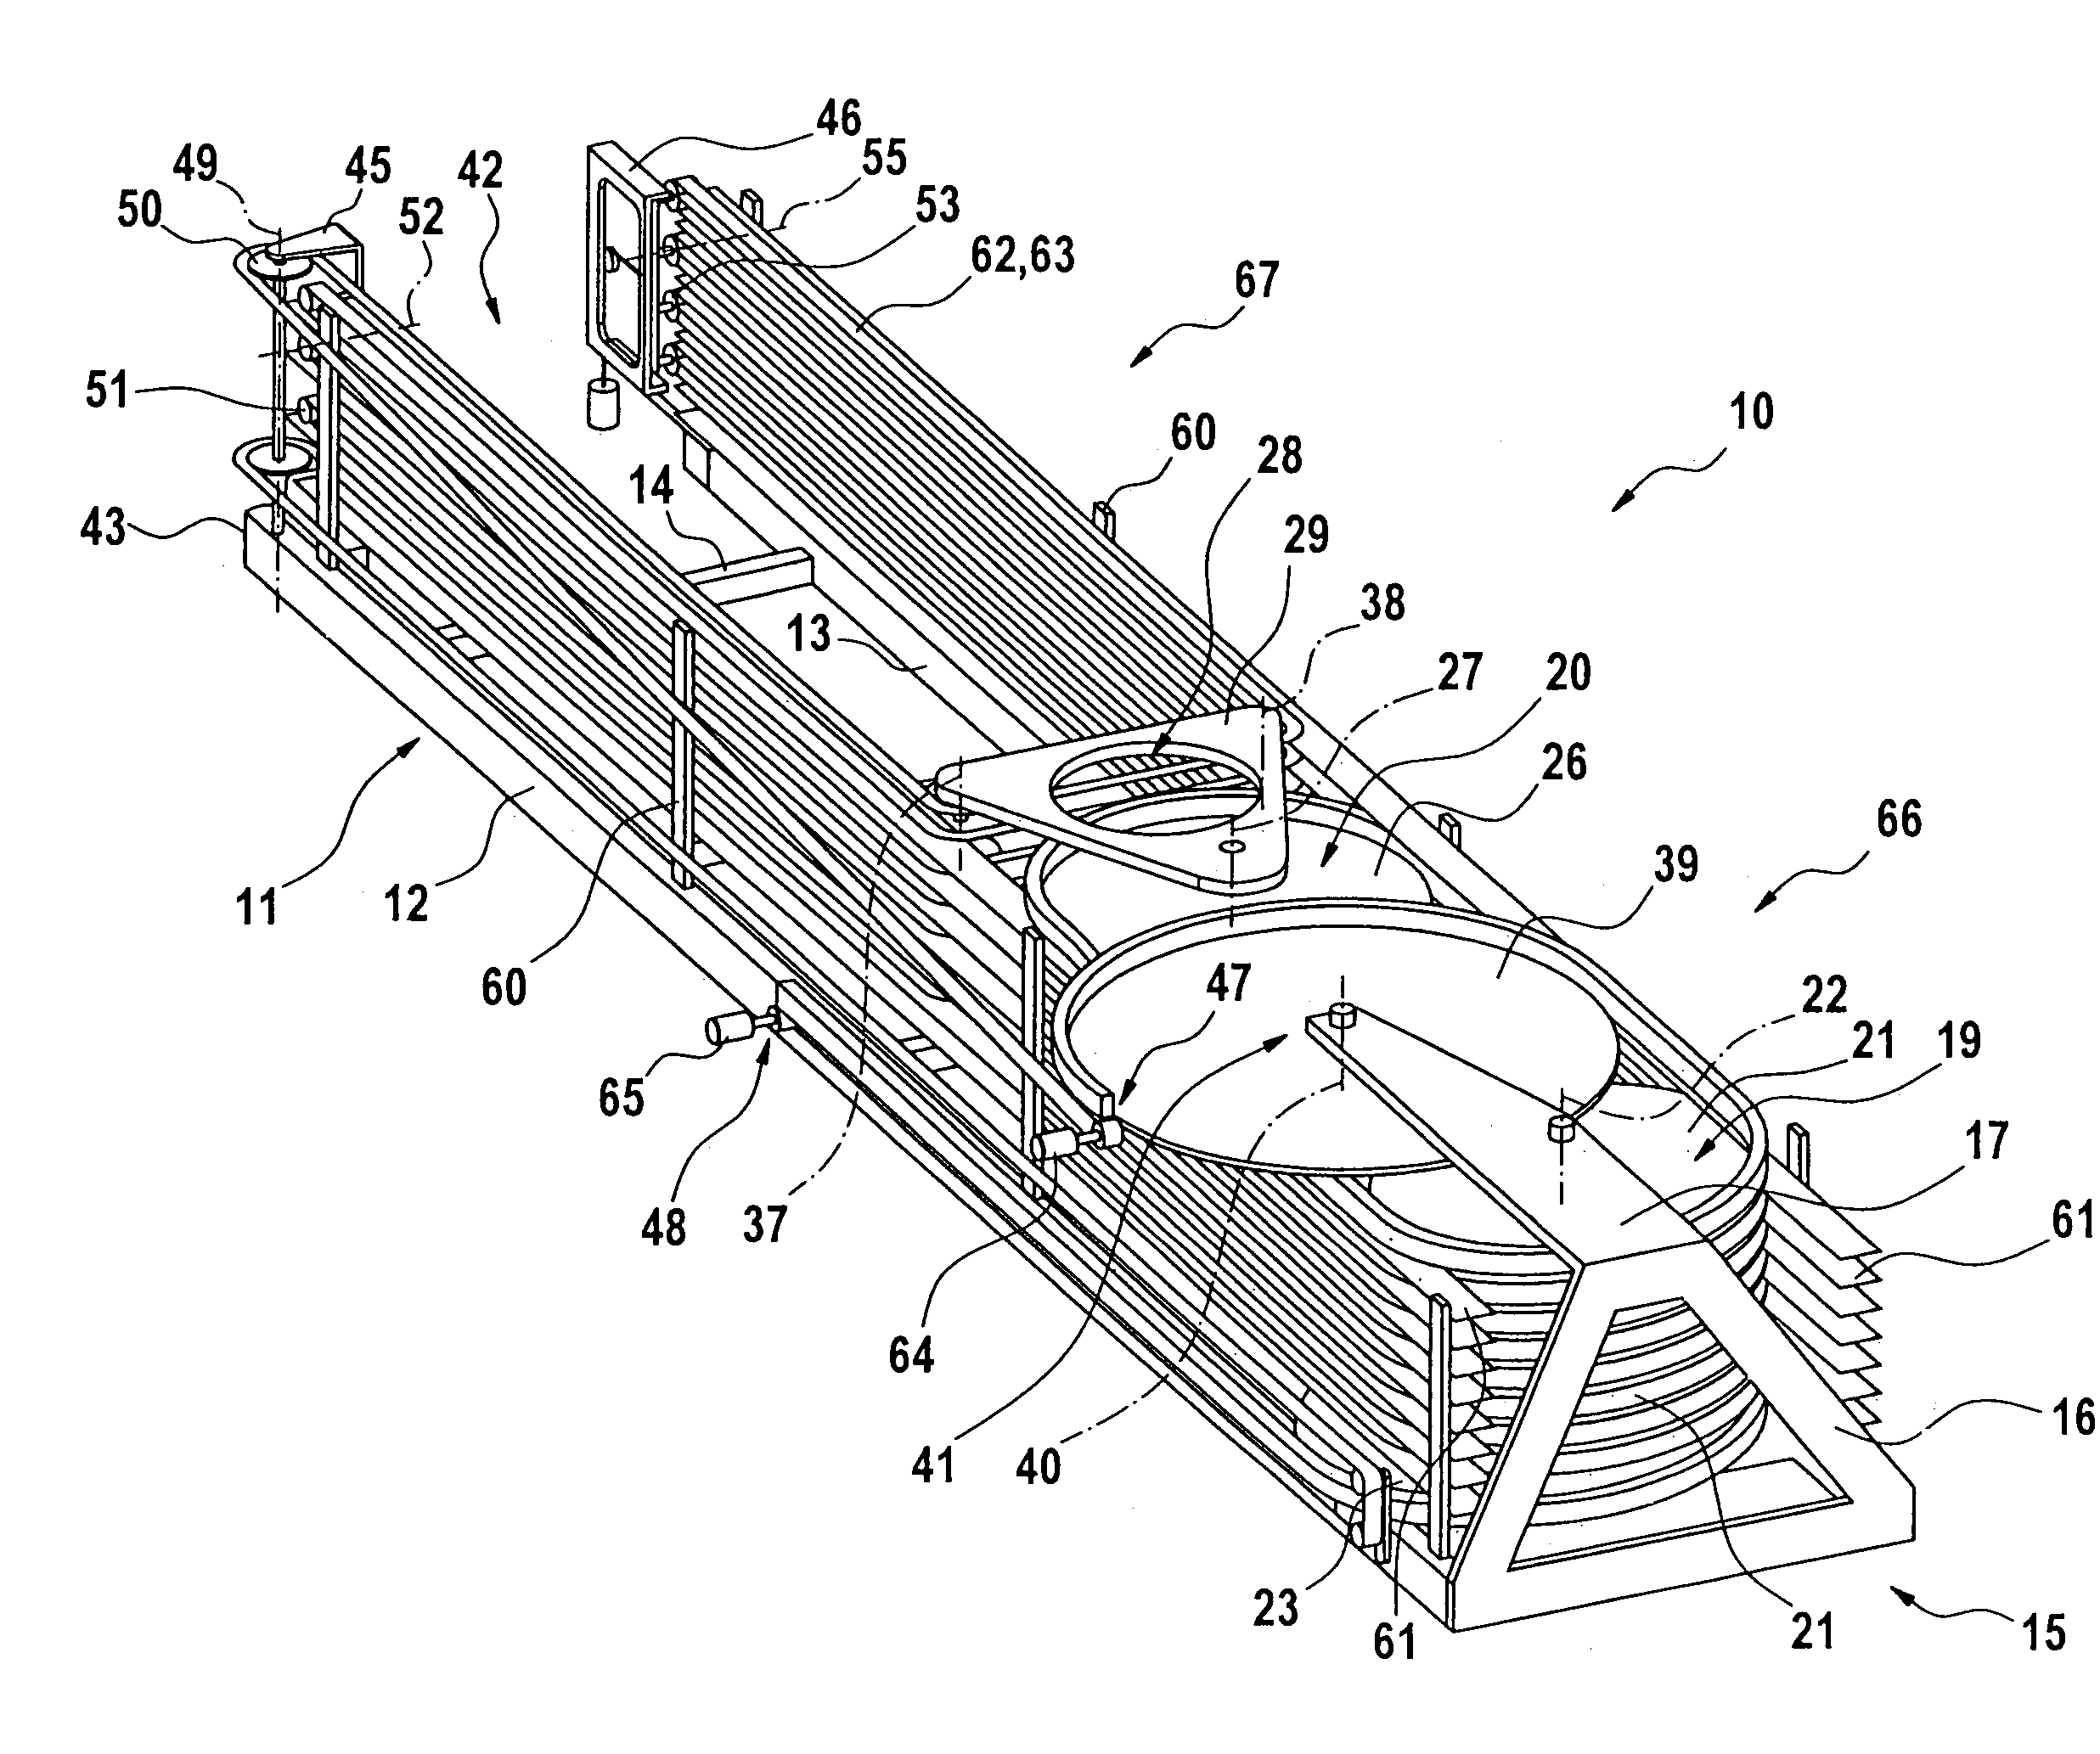 Storage device with variable storage capacity